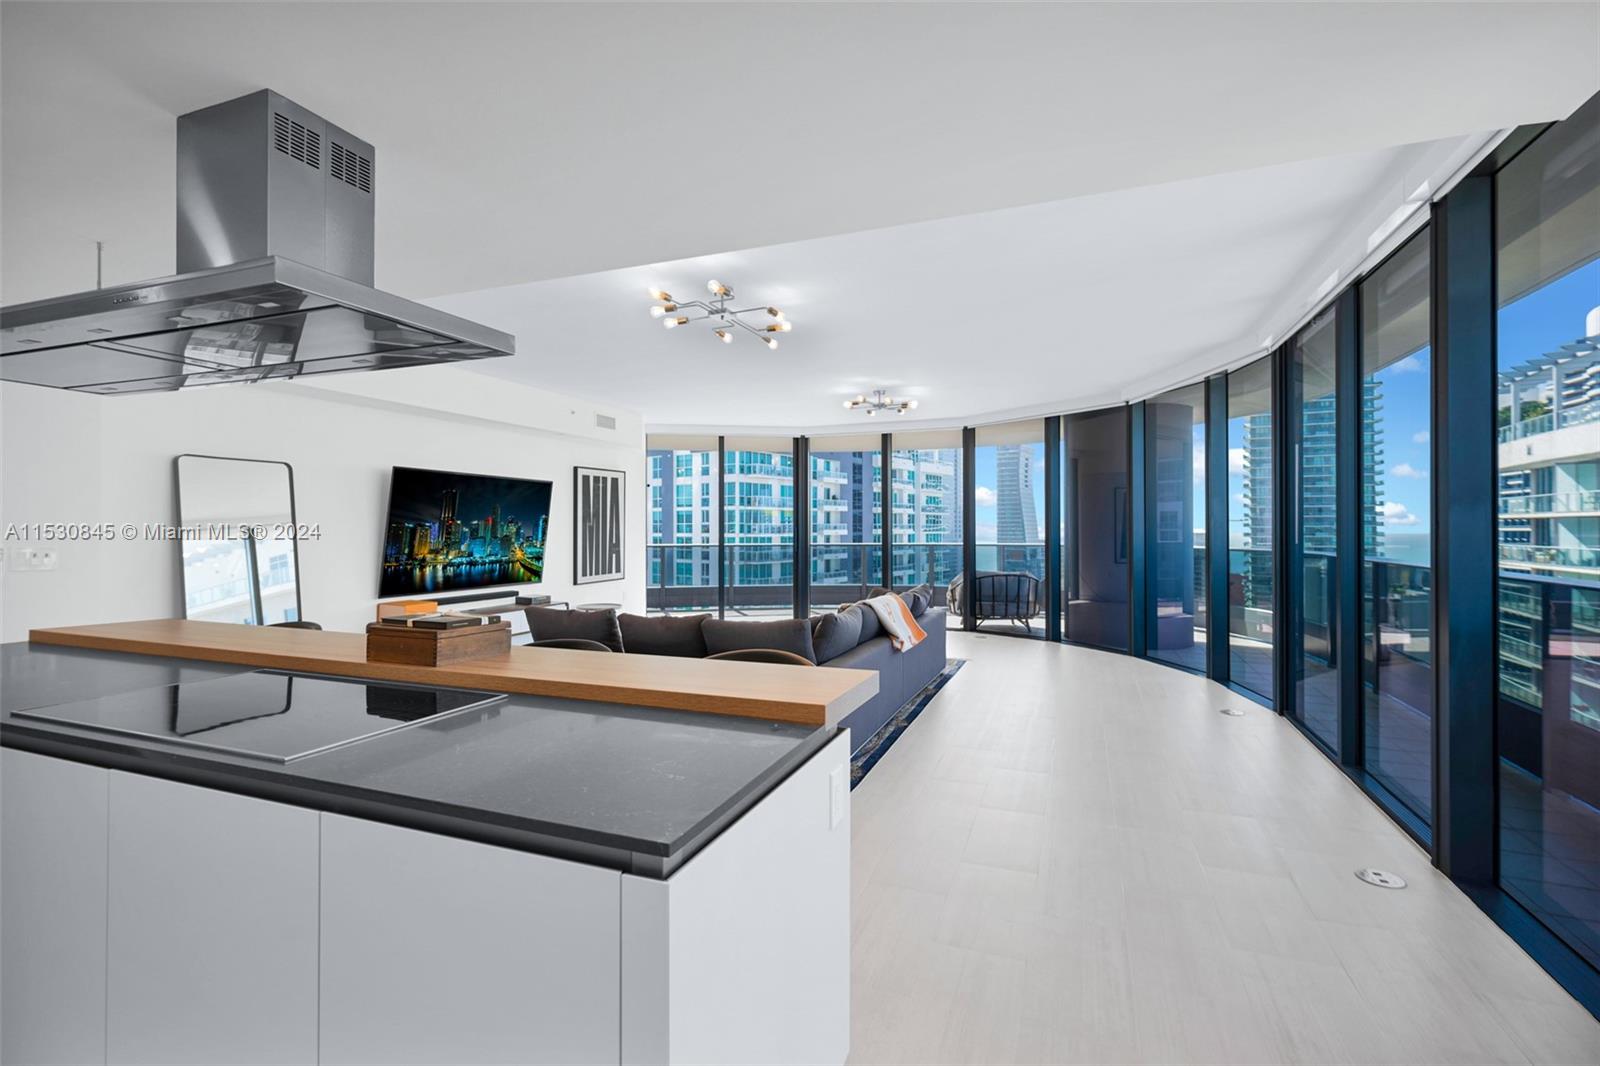 Spectacular upgraded high floor corner unit featuring 3 Bedroom 3.5 Bath in Brickell Flatiron. 
This desirable floorplan features 9 Foot Ceilings and amazing wrap around balcony with endless views, Miele appliances, Nest thermostat, Italian kitchen & doors, Custom closets & automatic window treatments. Includes 2 dedicated parking spaces along with 1 valet space.

Building amenities include: Sky club rooftop at the 64th floor offering restaurant, sky Pool with 360-degree views of Miami & Biscayne Bay, fitness center with the best views of the city, Wellness Center & Spa. 
Flatiron Club located on the 17th & 18th floors features a private movie theater, outdoor lap pool, children's playroom, social lounge room, billiards room. 
Call for details!